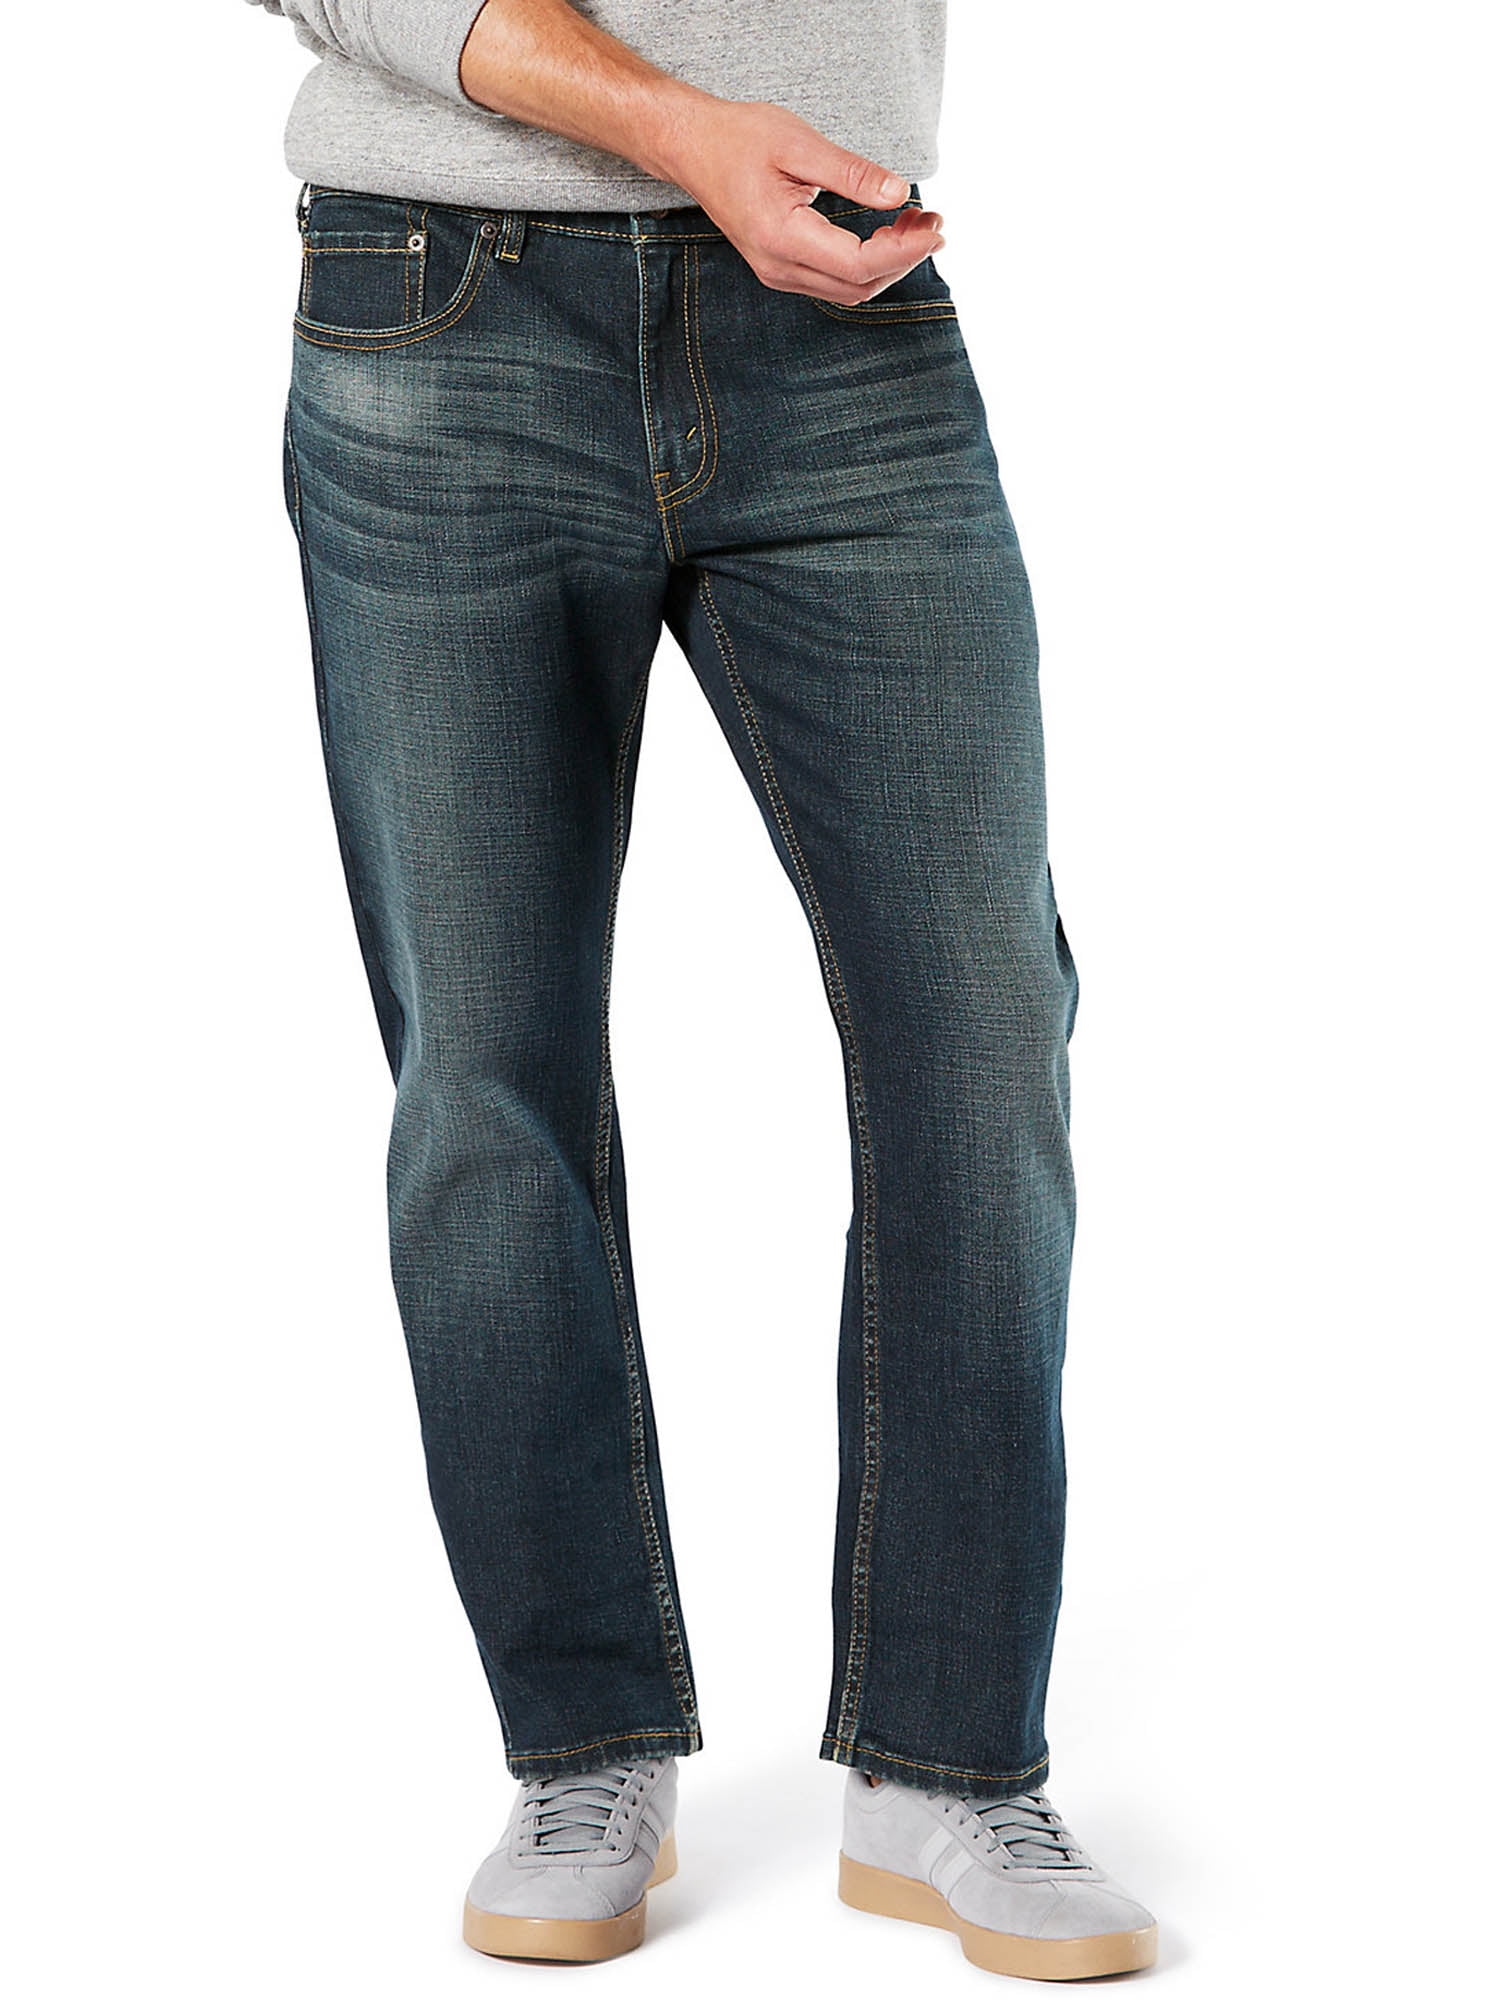 by Levi Strauss Co. Men's Relaxed Fit Jeans Walmart.com